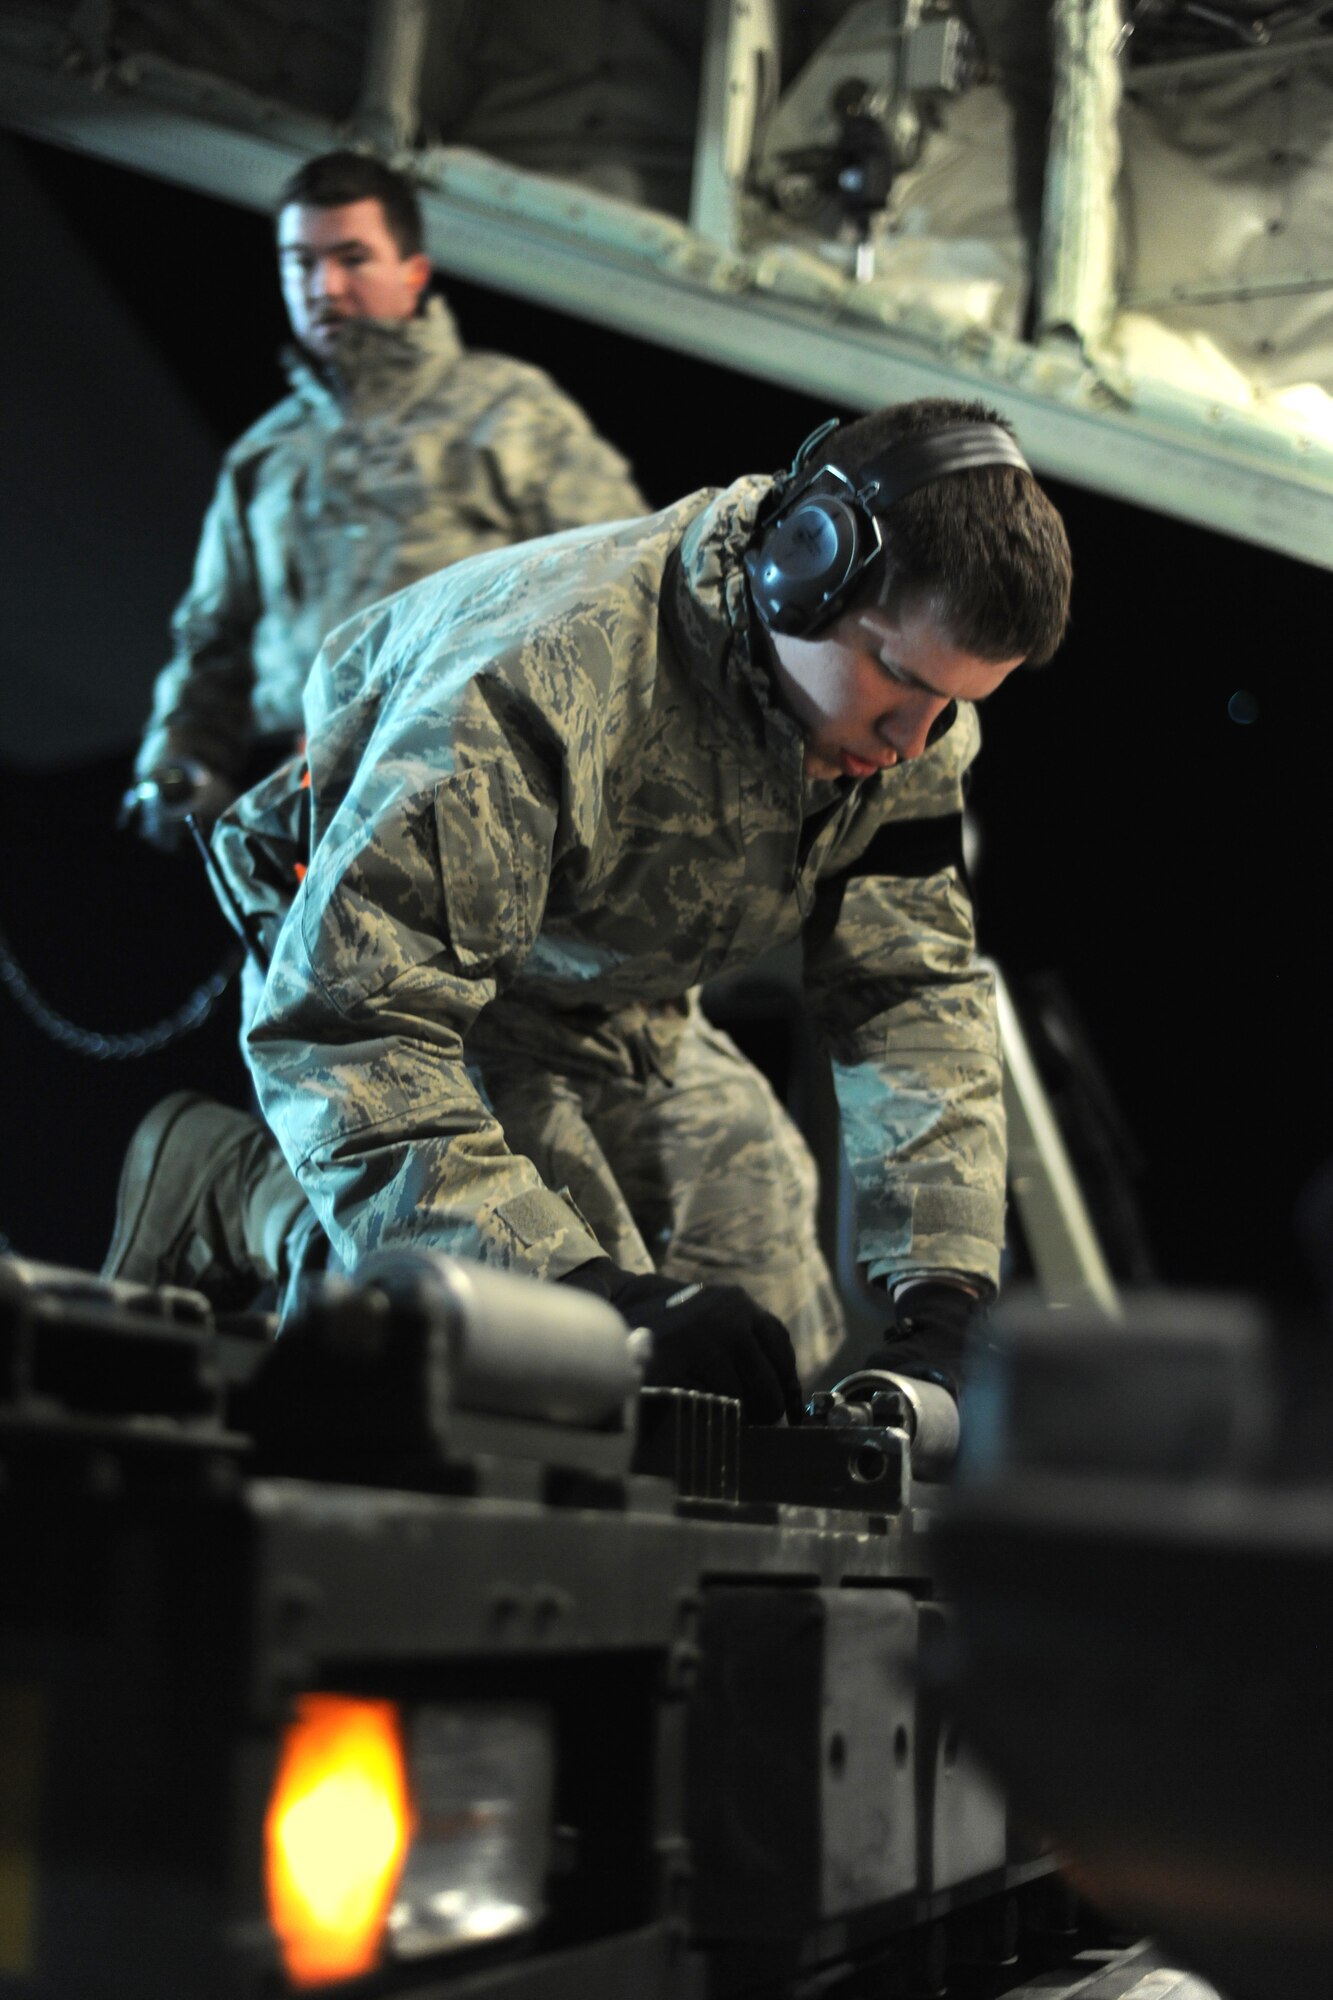 SPANGDAHLEM AIR BASE, Germany – An Airman from the 726th Air Mobility Squadron prepares to load cargo onto a C-130J Super Hercules here in support of Operation Odyssey Dawn March 20. Joint Task Force Odyssey Dawn is the U.S. Africa Command task force established to provide operational and tactical command and control of U.S. military forces supporting the international response to the unrest in Libya and enforcement of United Nations Security Council Resolution (UNSCR) 1973. UNSCR 1973 authorizes all necessary measures to protect civilians in Libya under threat of attack by Qadhafi regime forces.  JTF Odyssey Dawn is commanded by U.S. Navy Admiral Samuel J. Locklear, III. (U.S. Air Force photo/Senior Airman Nathanael Callon)